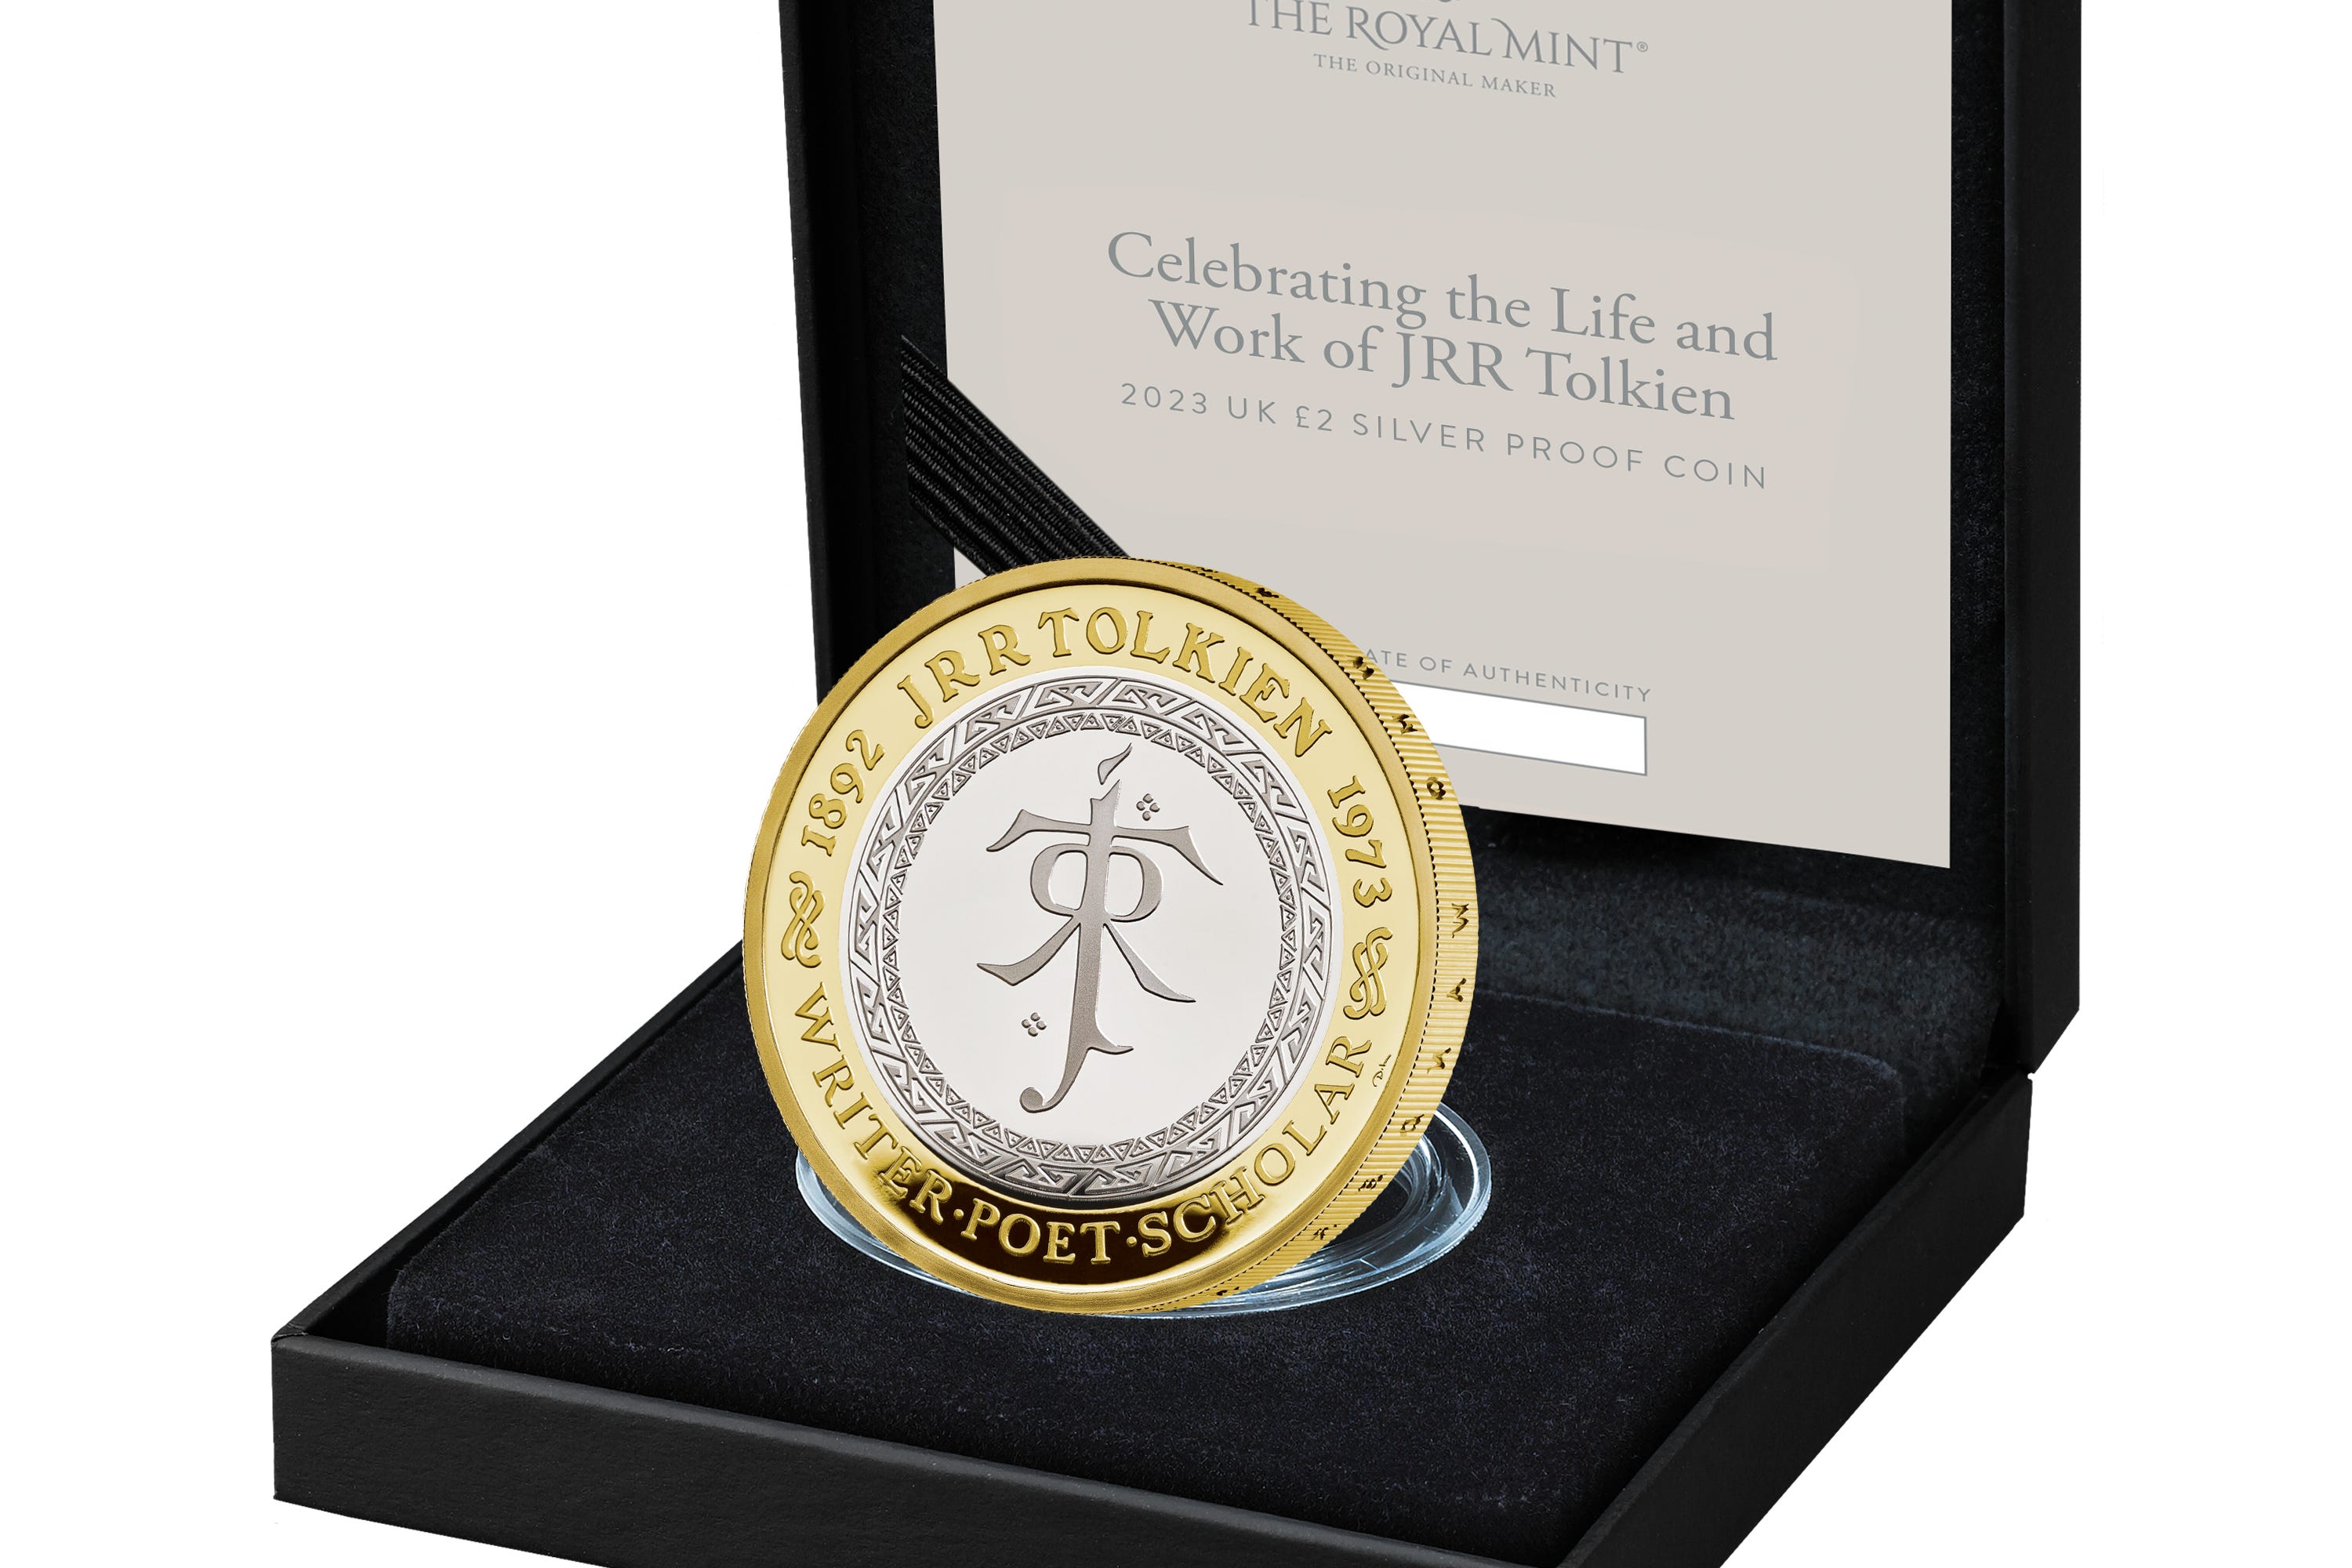 The £2 coin in tribute to the life of JRR Tolkien (Royal Mint/PA)